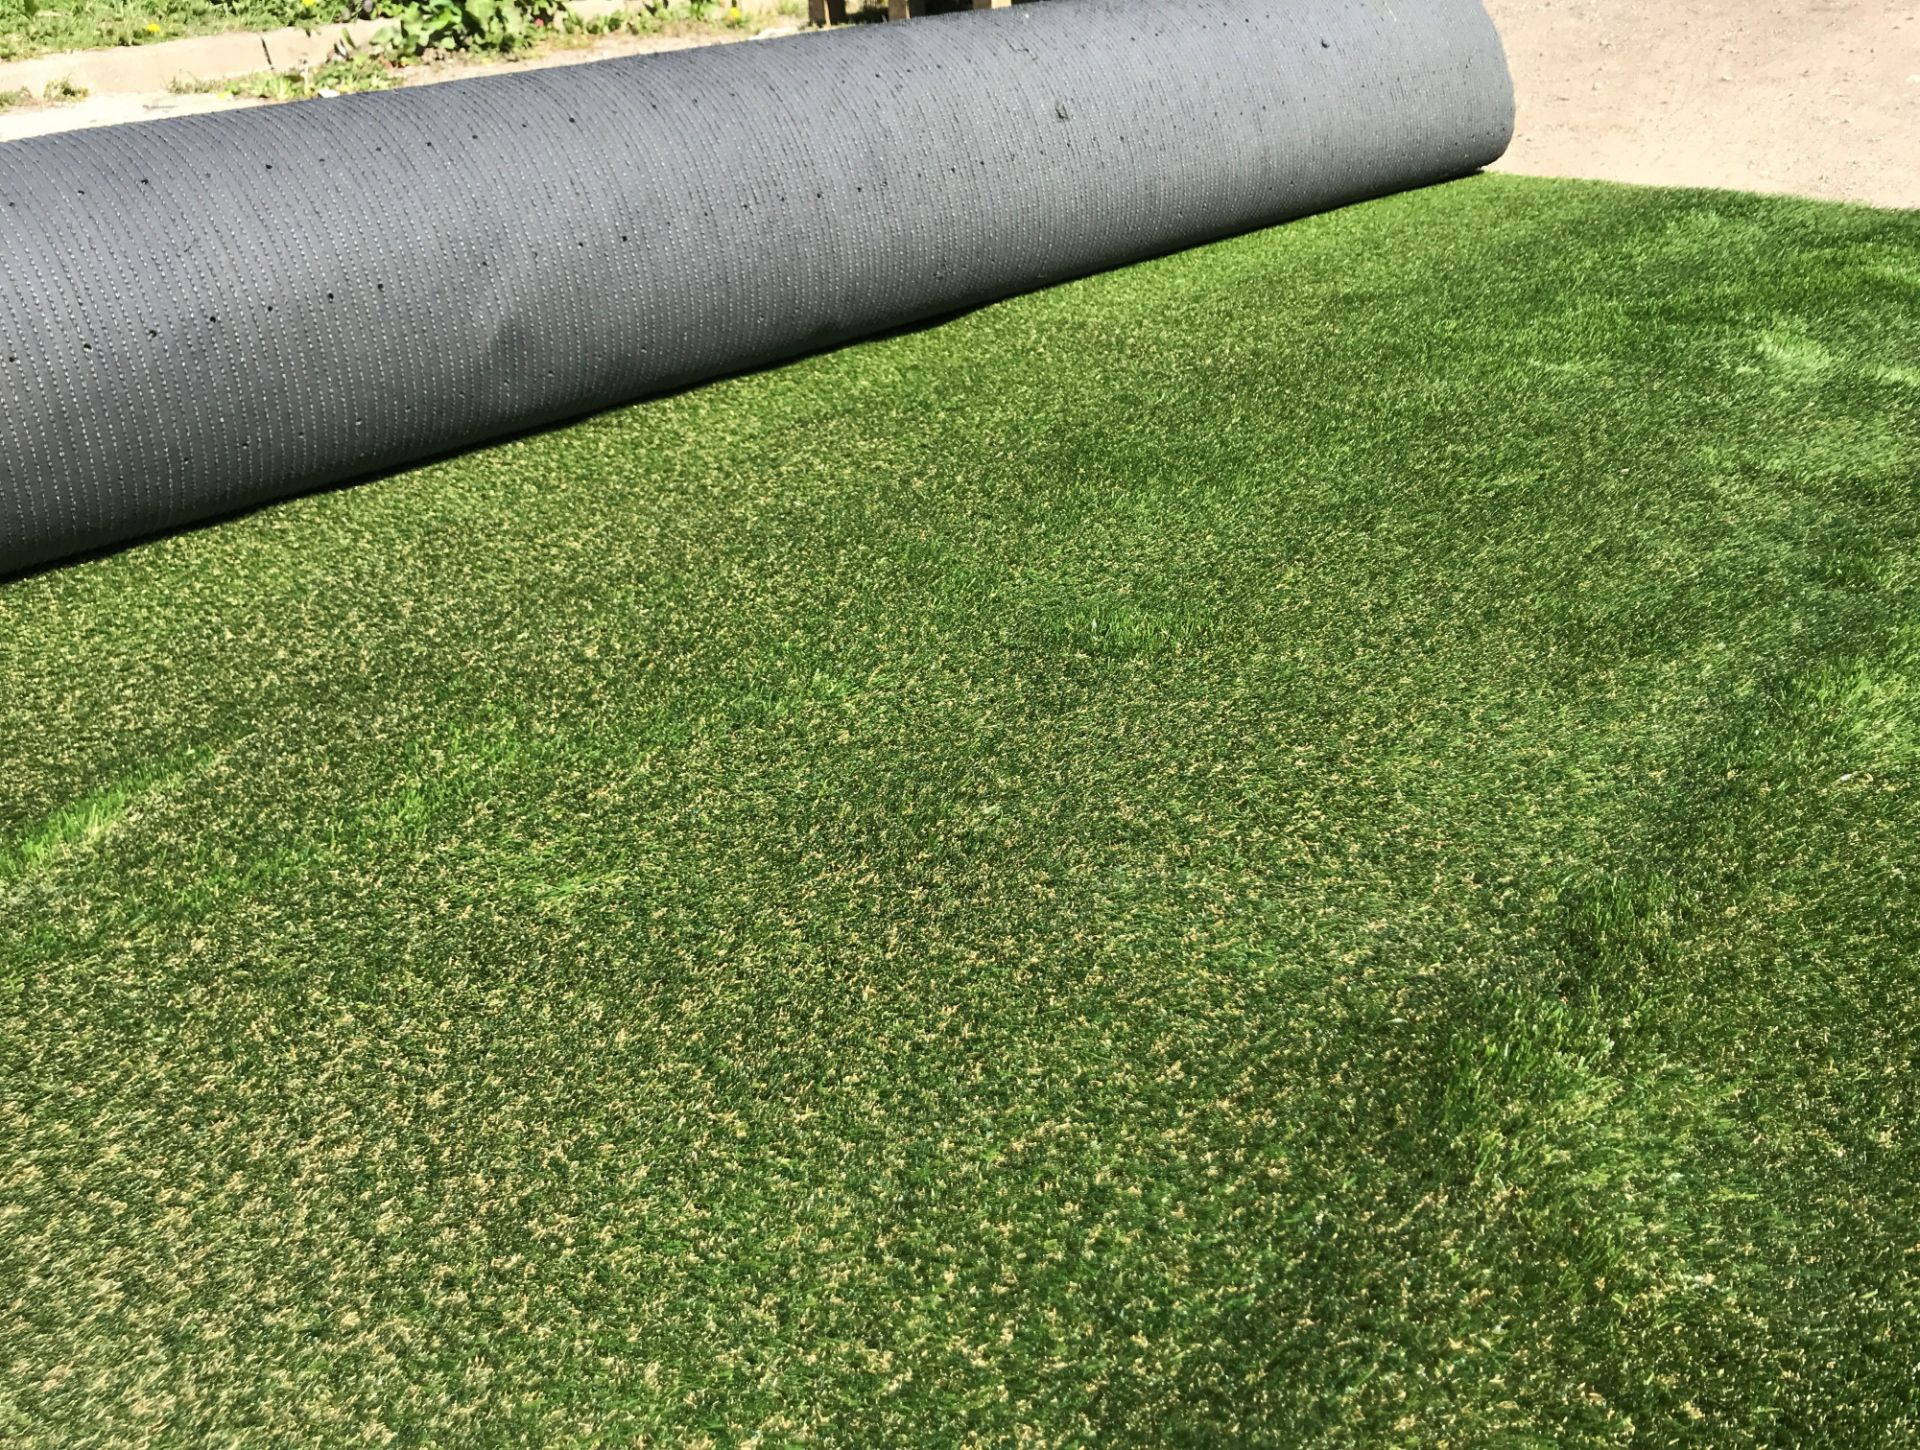 1 x Playrite Nearly Grass - Artificial Grass/Turf - 30X4 Meter Roll - Ref: NWF022 - CL912 - NO VAT - Image 3 of 6